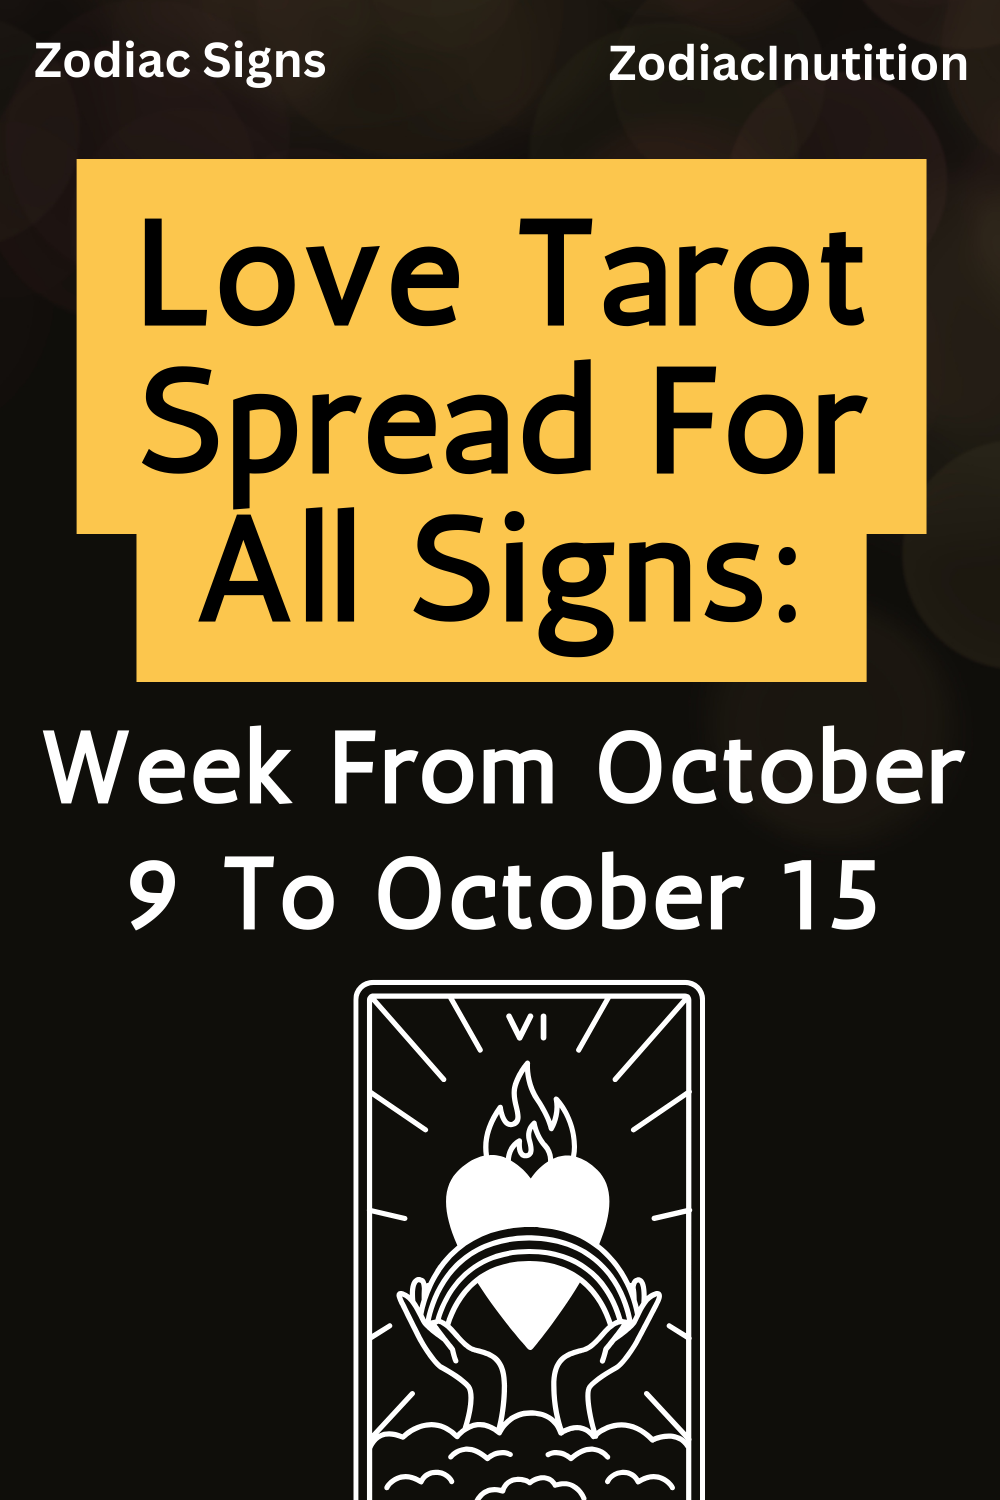 Love Tarot Spread For All Signs: Week From October 9 To October 15